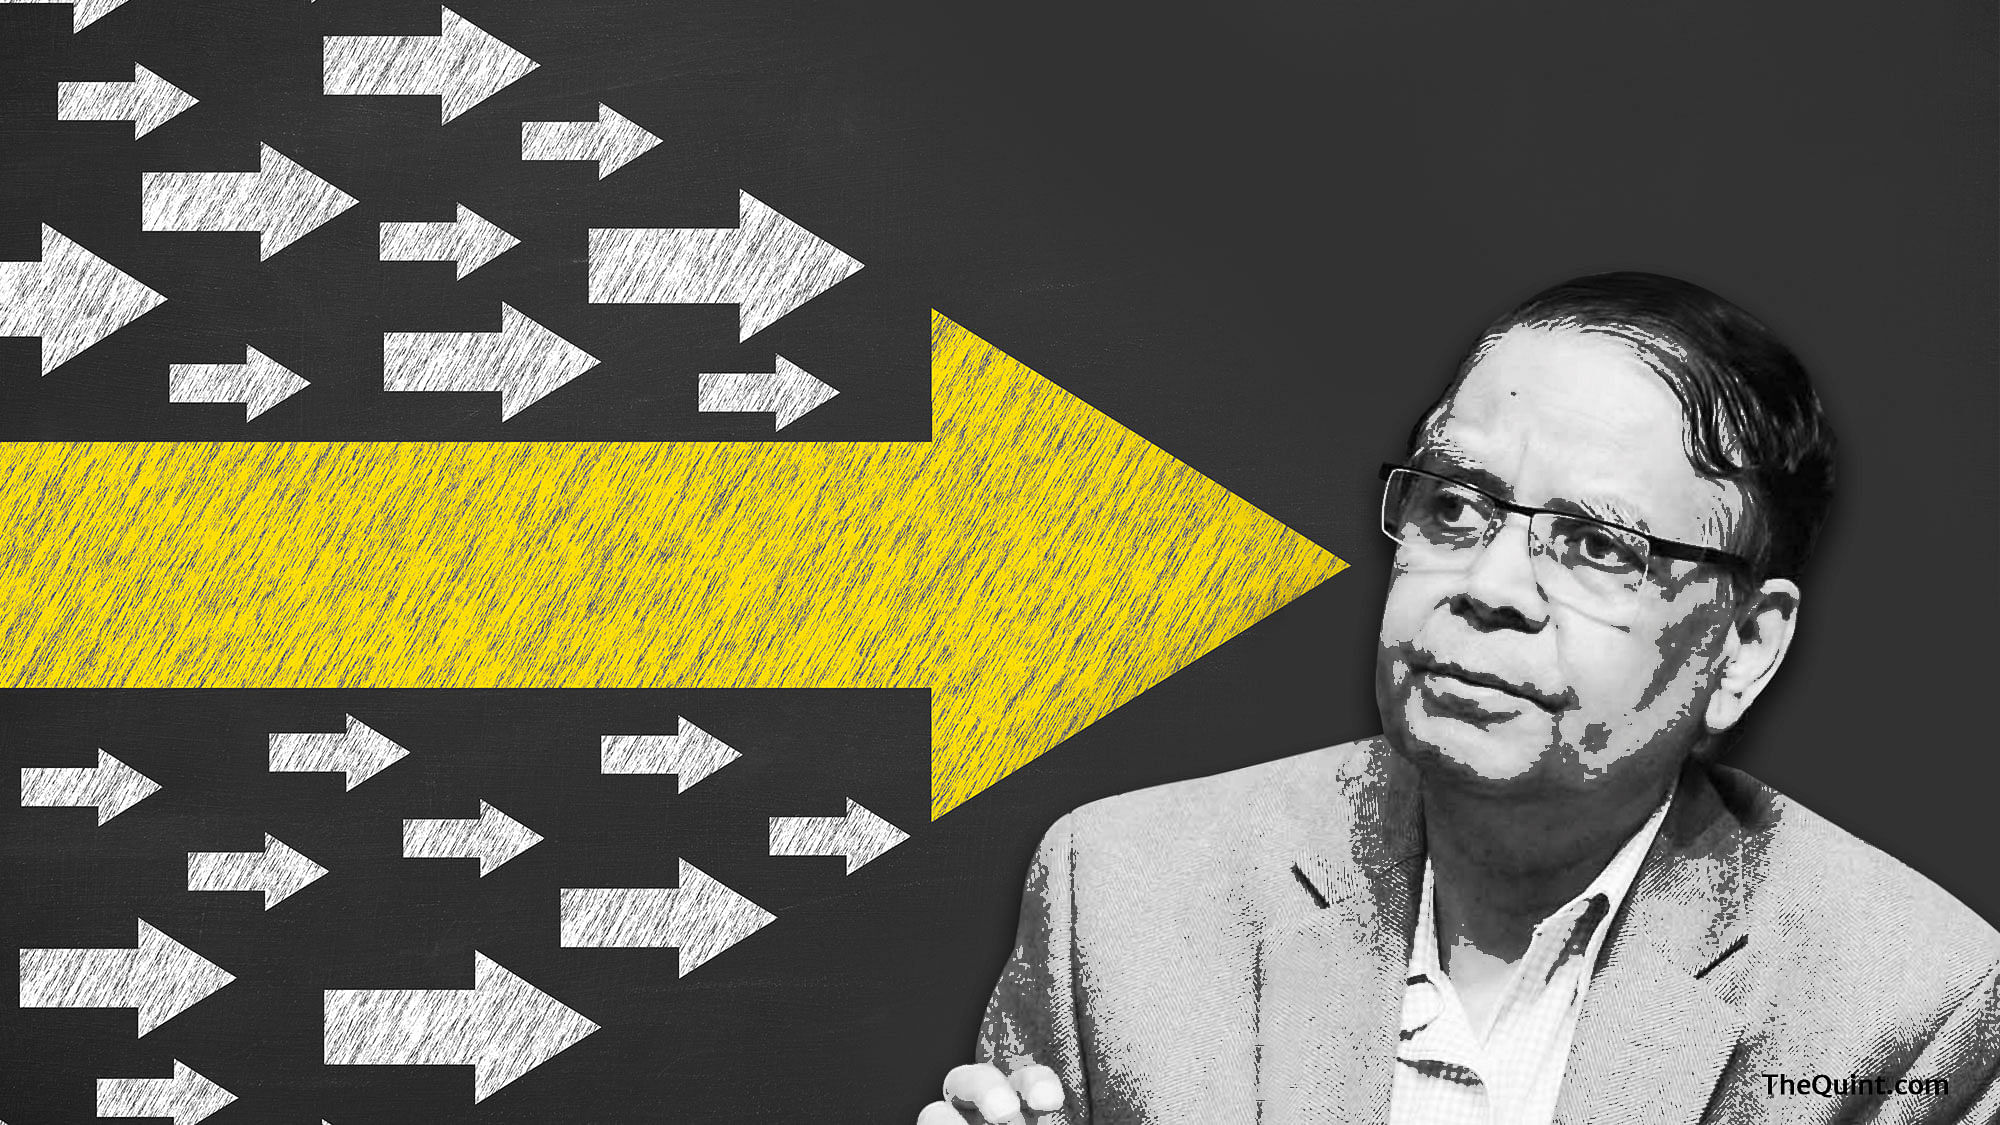 Apart from speculations on Arvind Panagariya’s resignation, his reason of going back to academics might be valid.